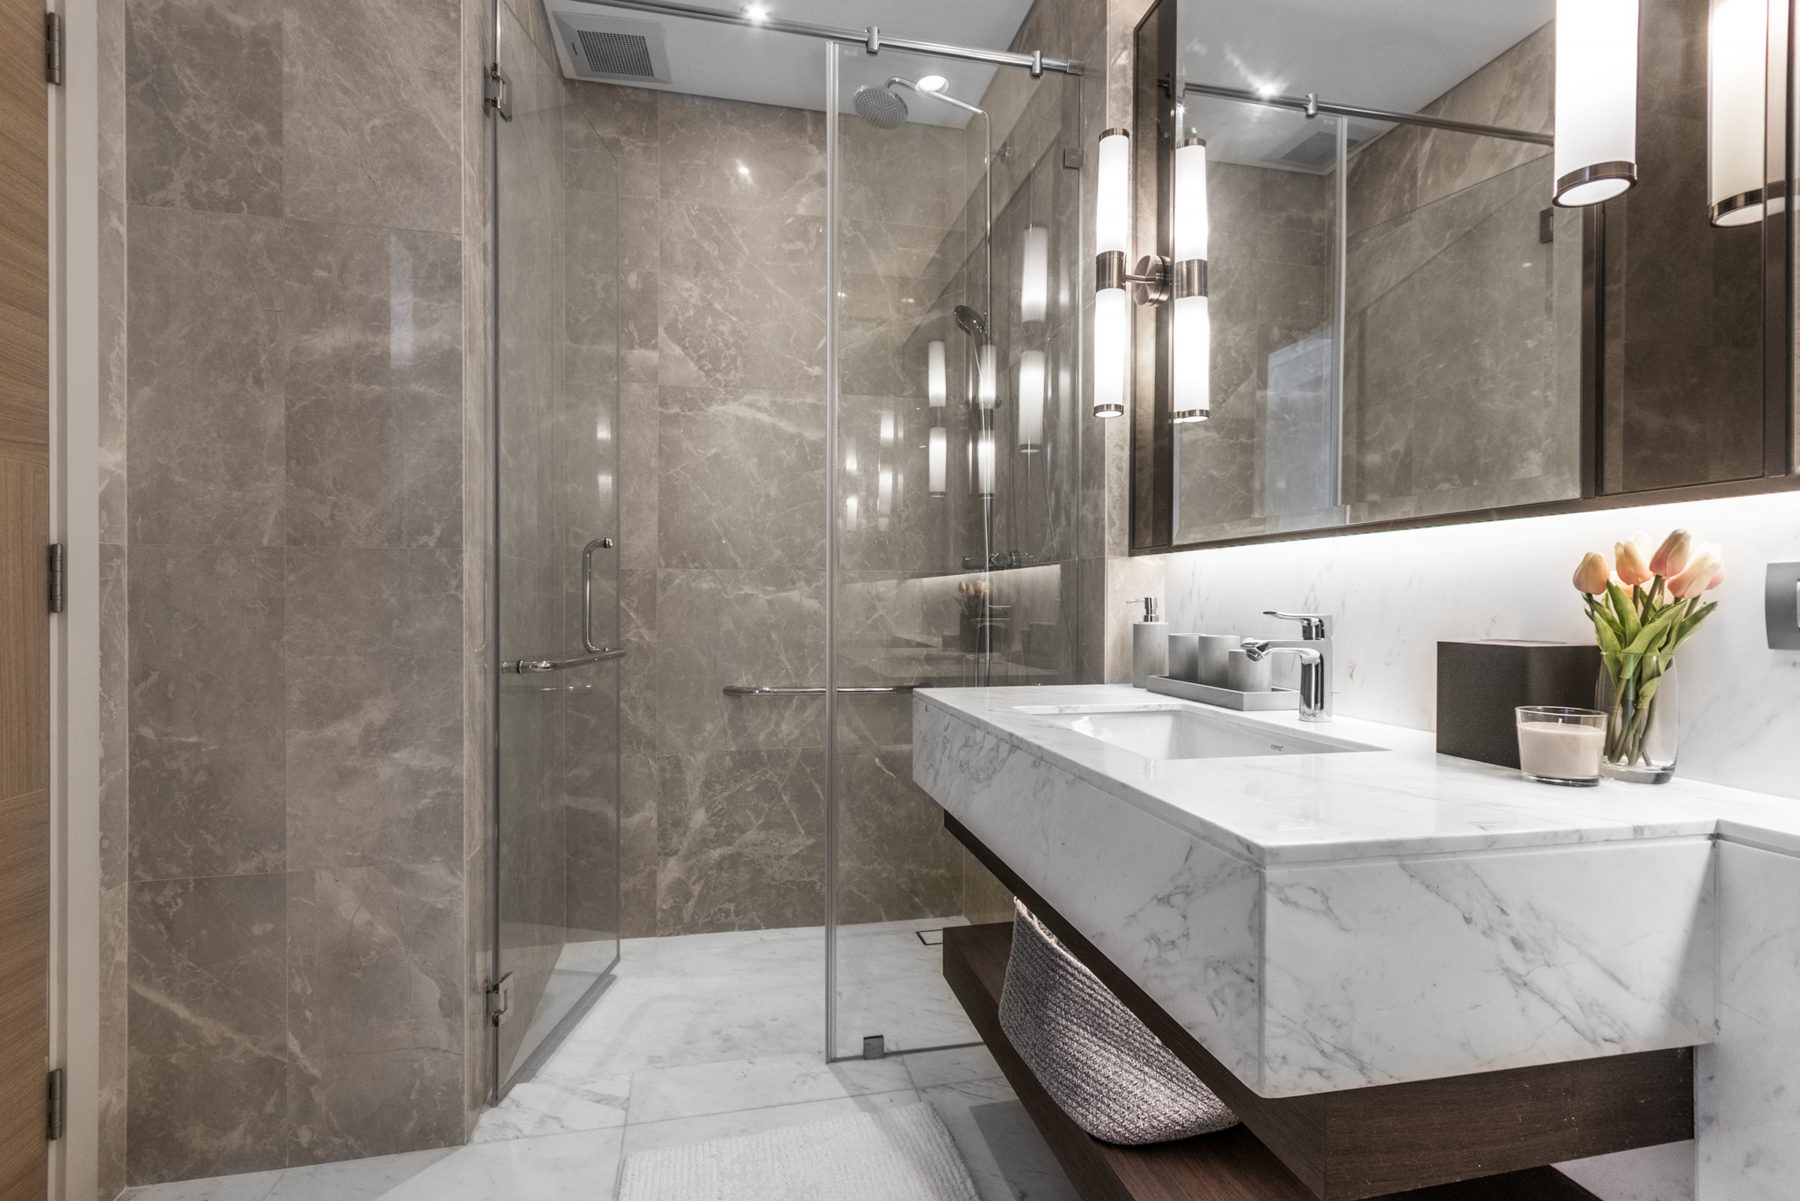 Modern bathroom with curbless shower entry